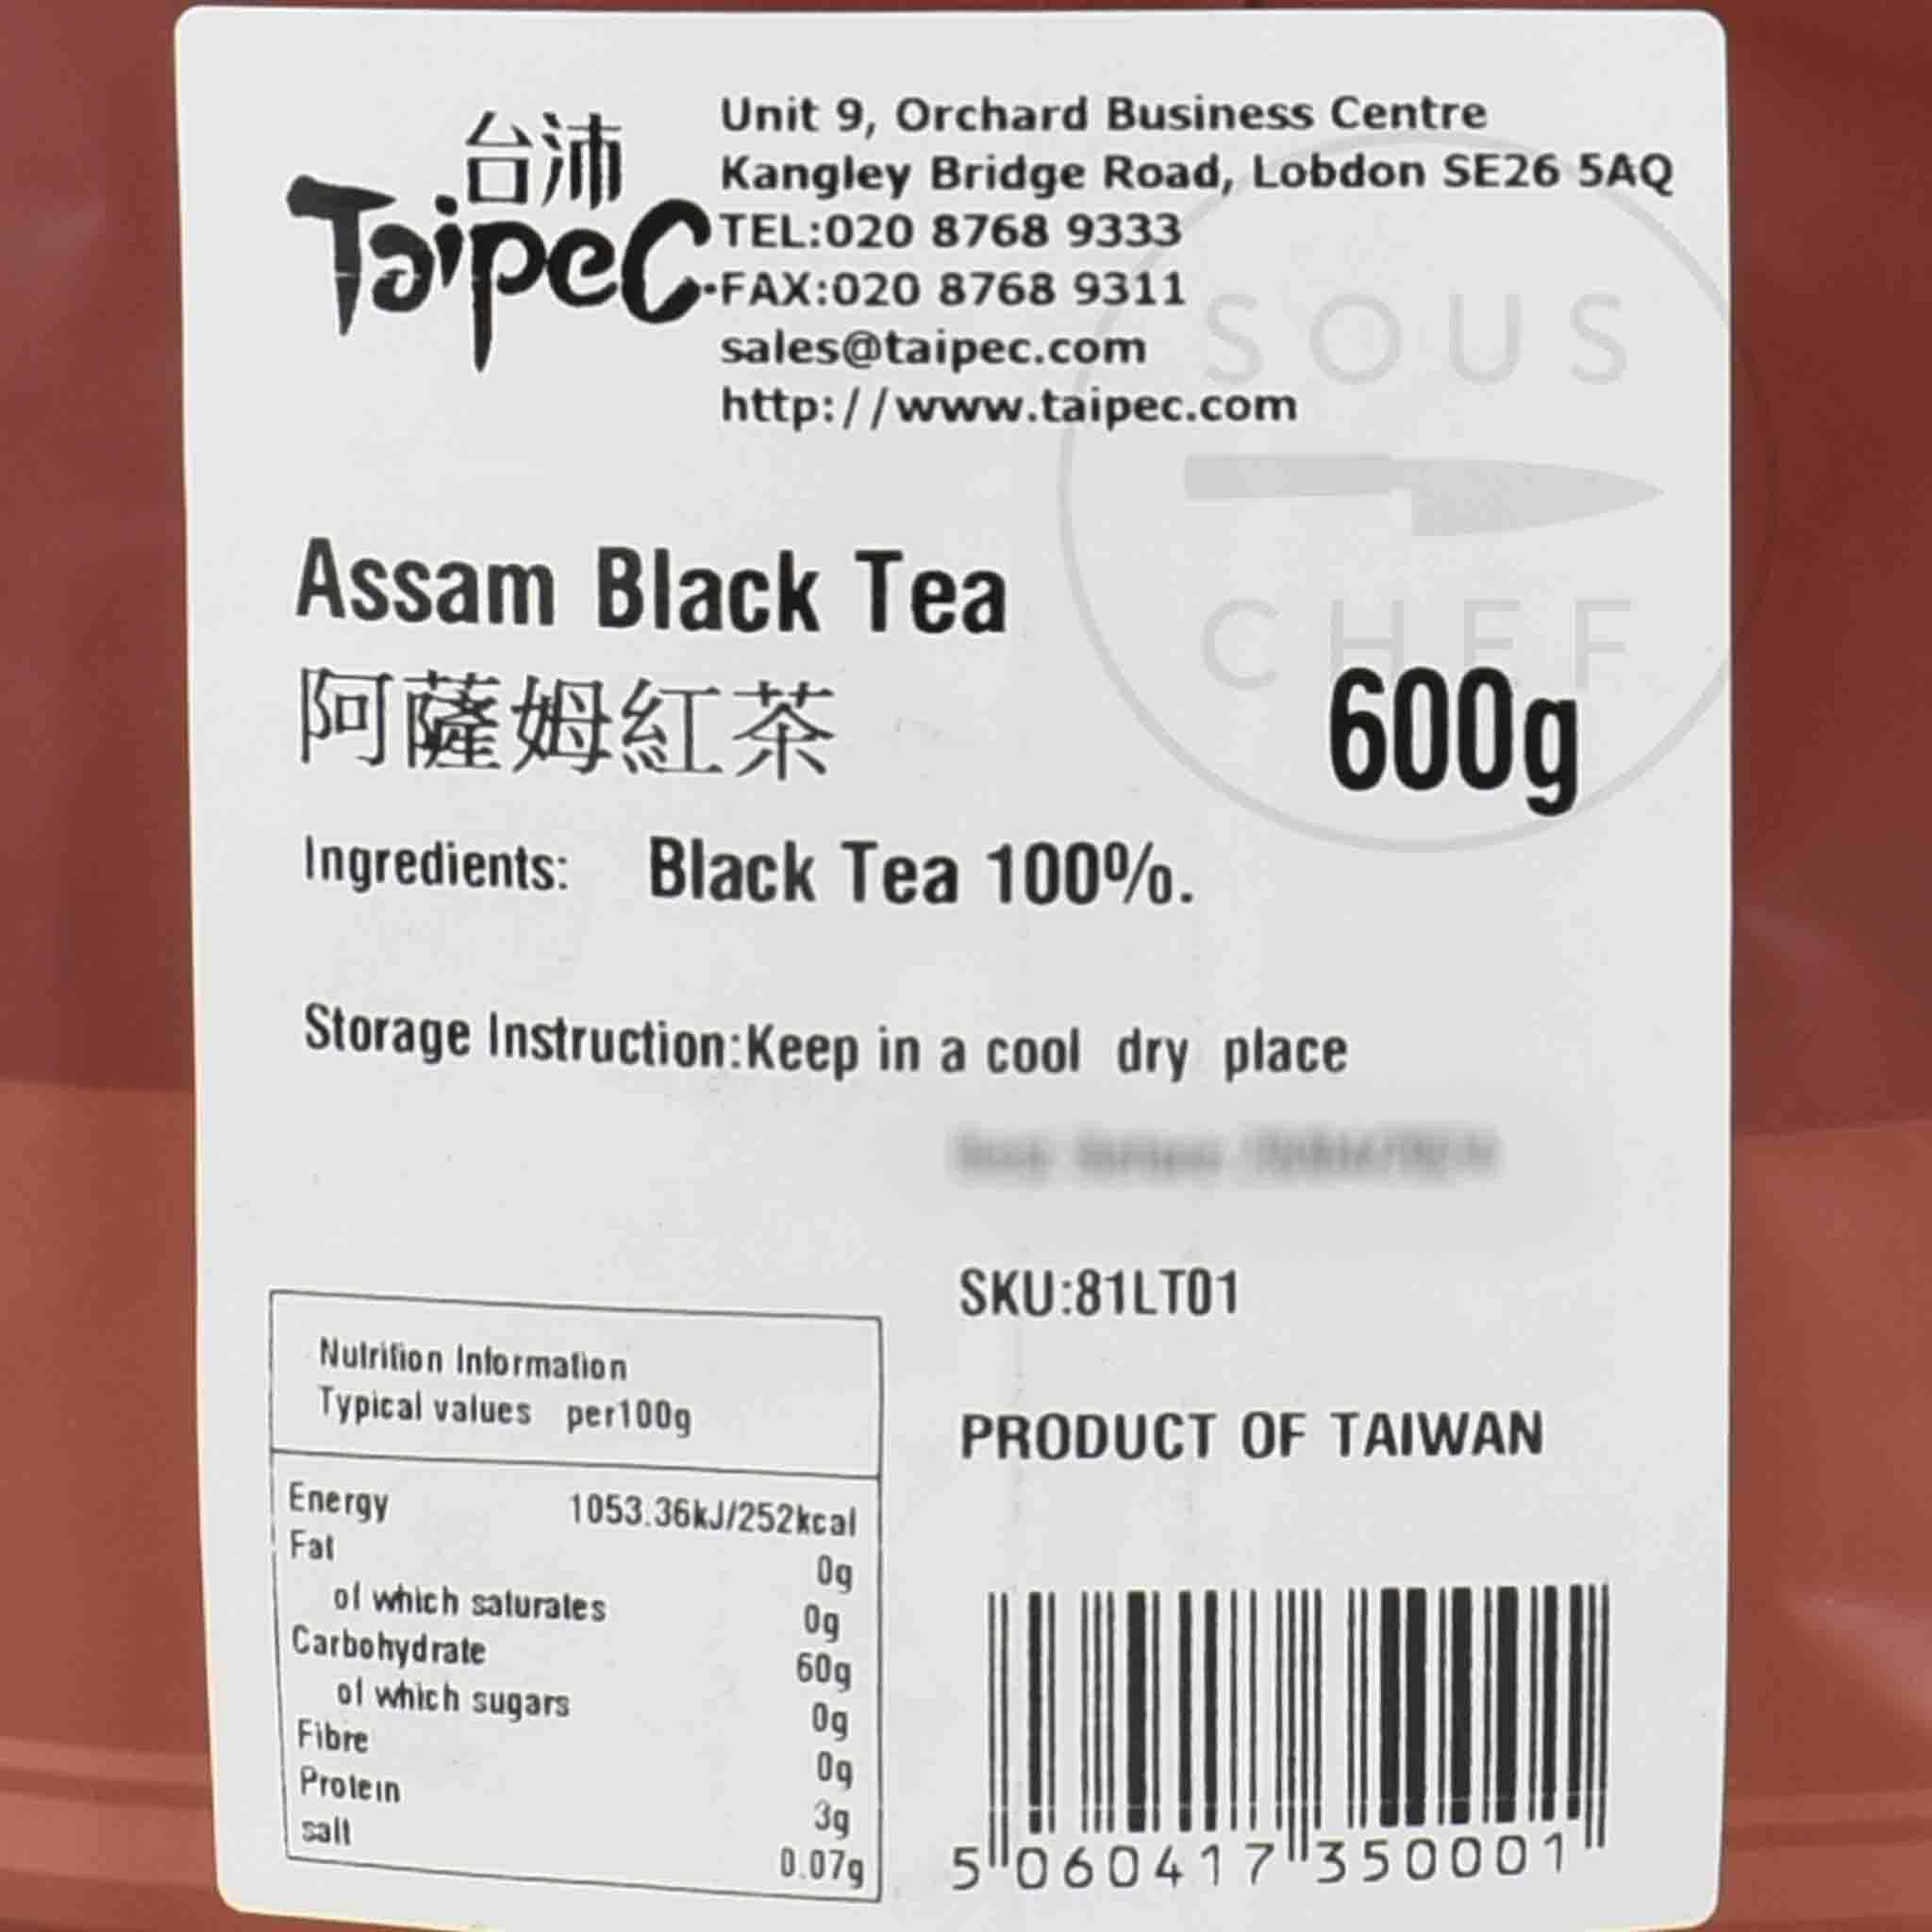 Taiwanese Assam Black Tea 600g ingredients and nutrition